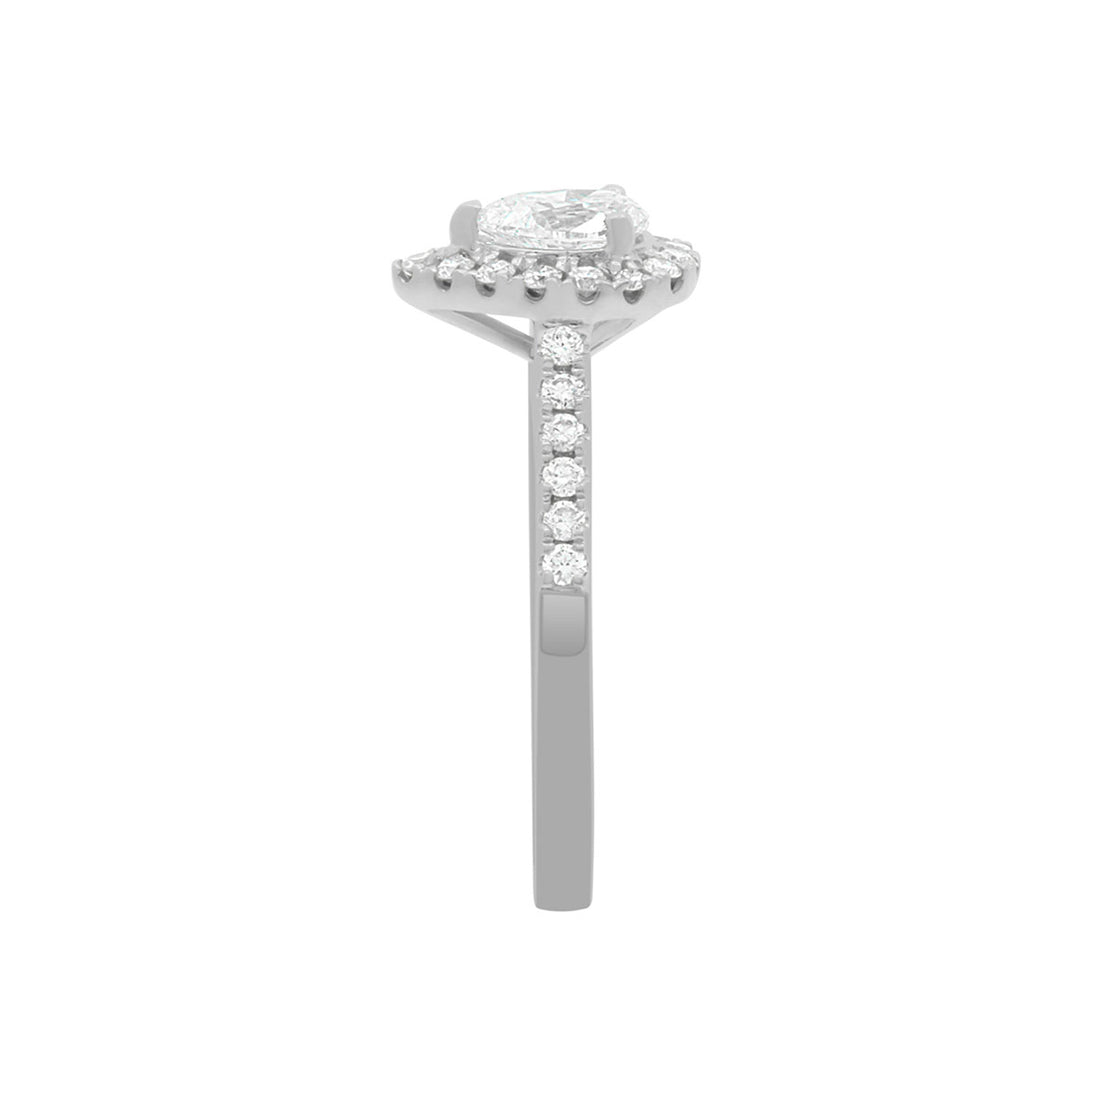 Pear Cut Halo Ring in platinum, side view, standing upright, ON A WHITE SURFACE WITH A WHITE BACKGROUND